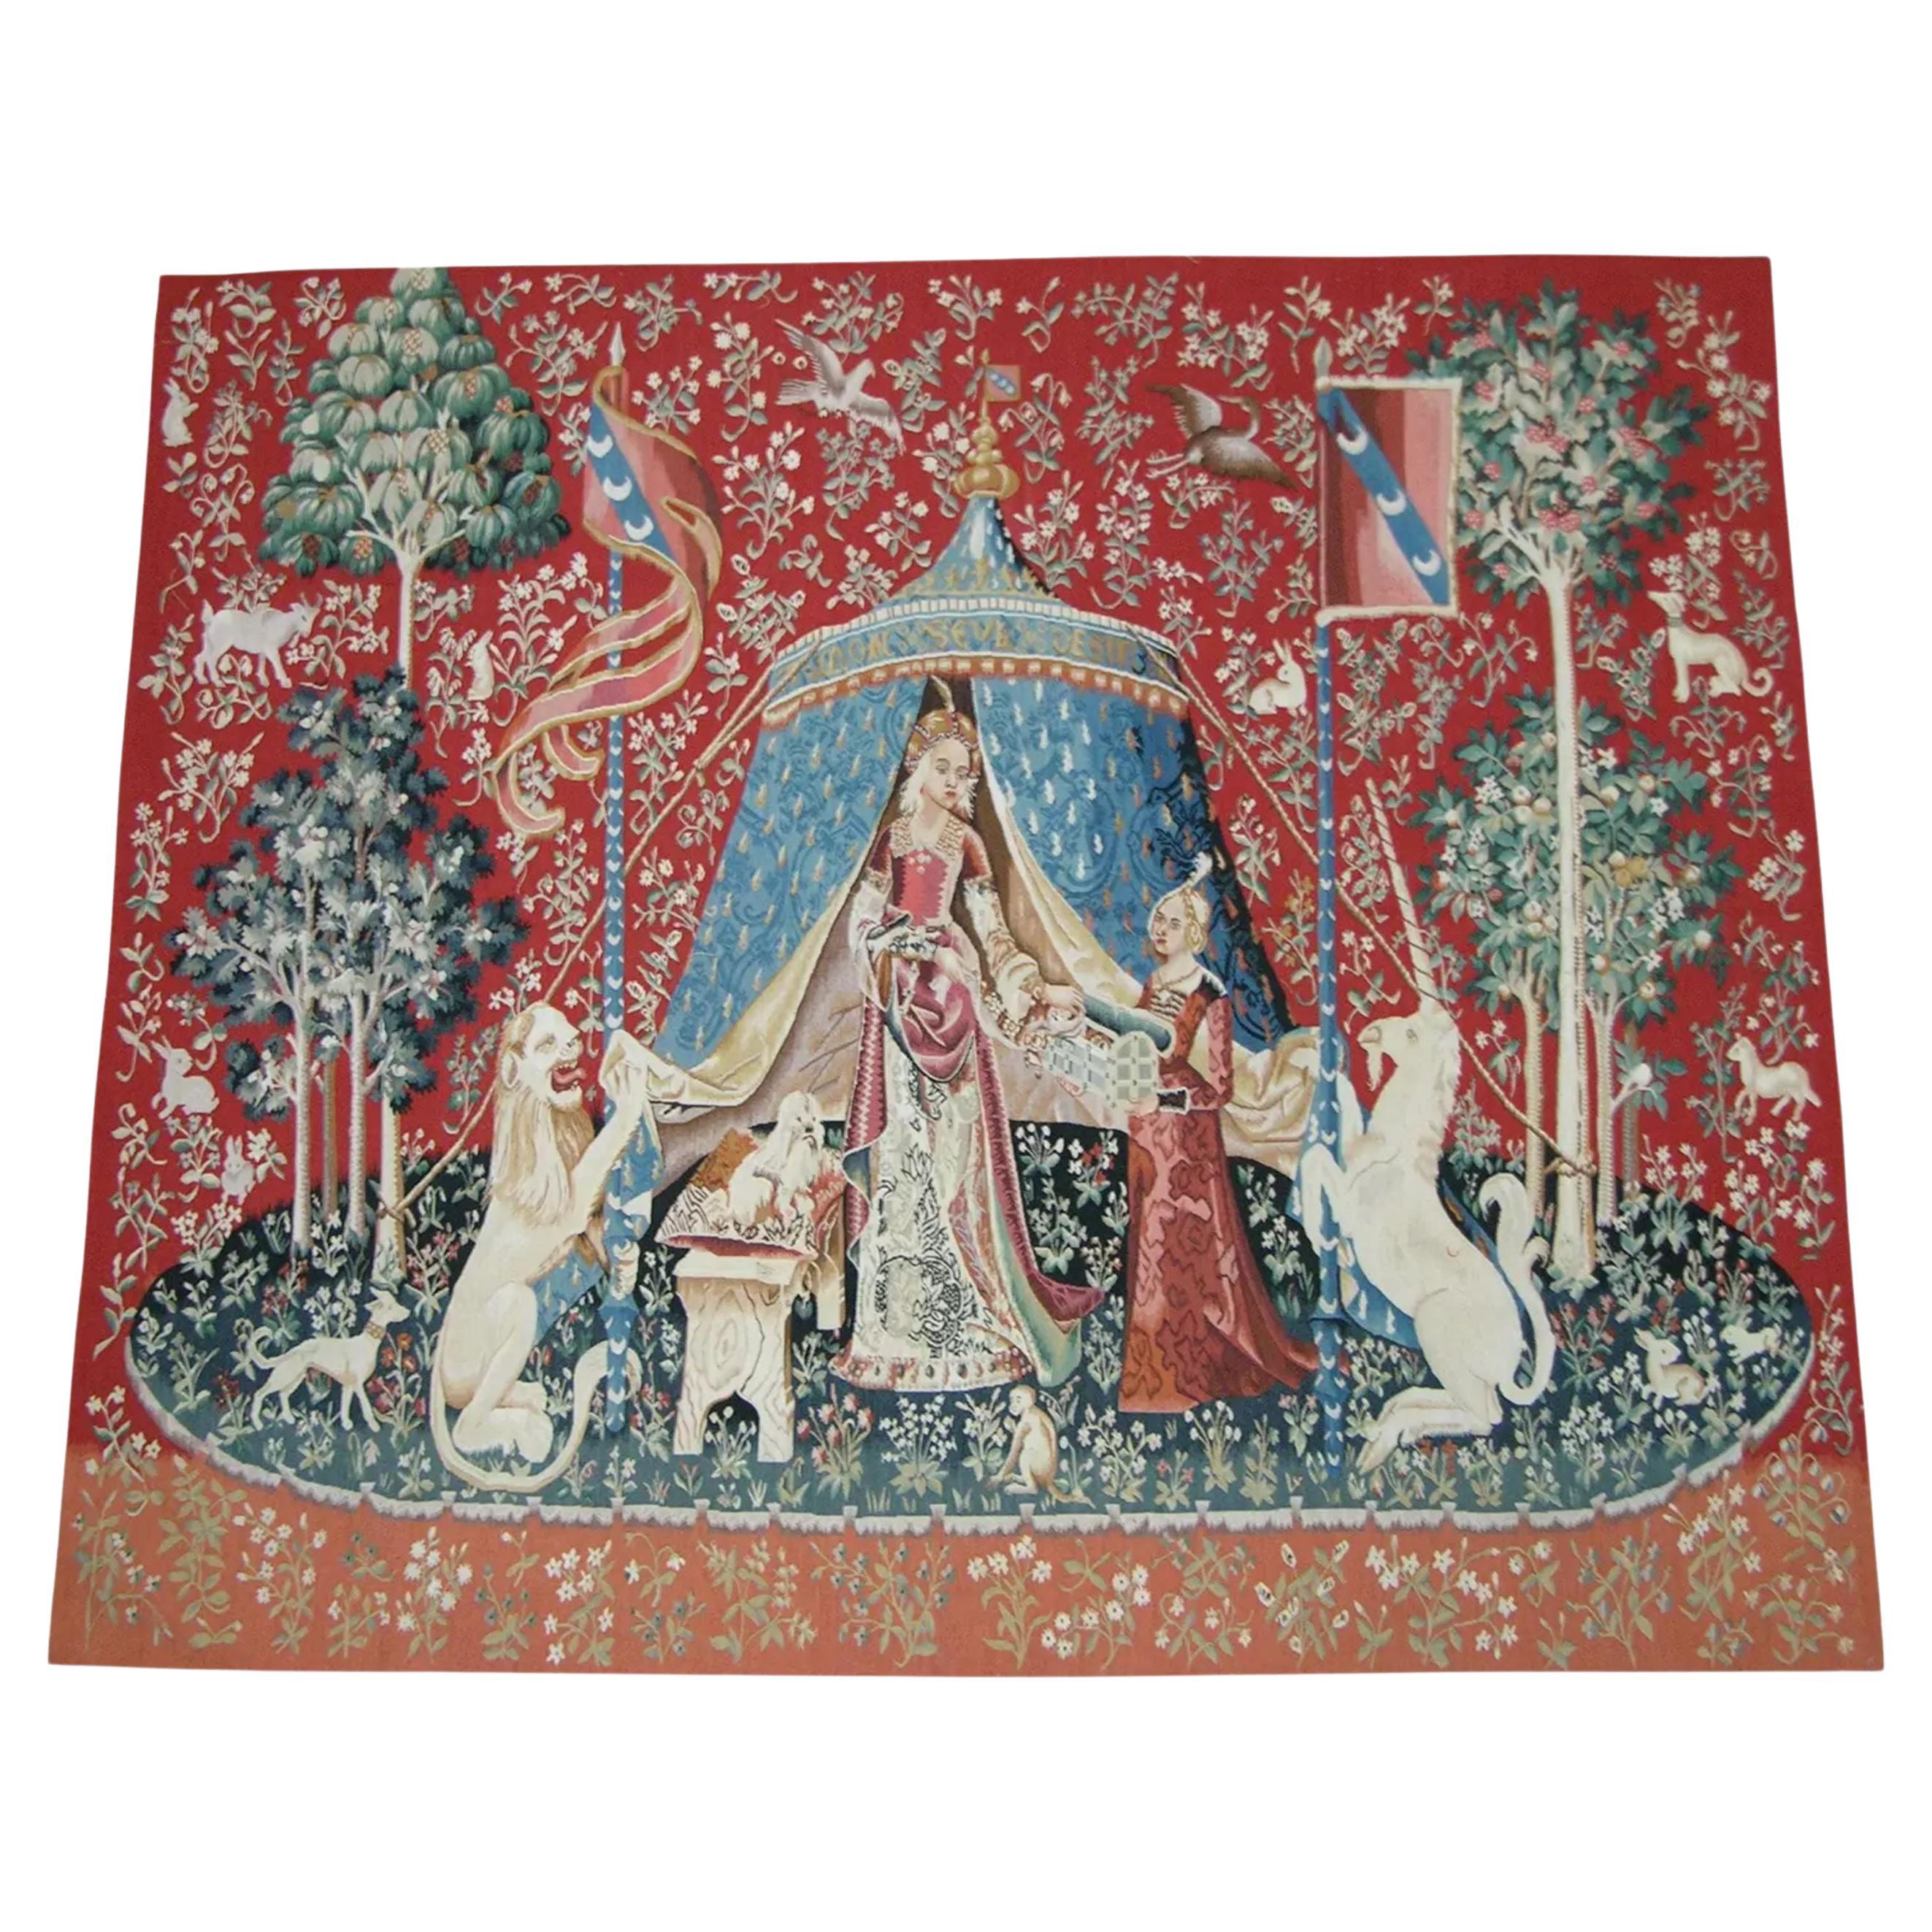 Vintage Tapestry Depicting Royalty and Majestic Animals 6.3X6.1